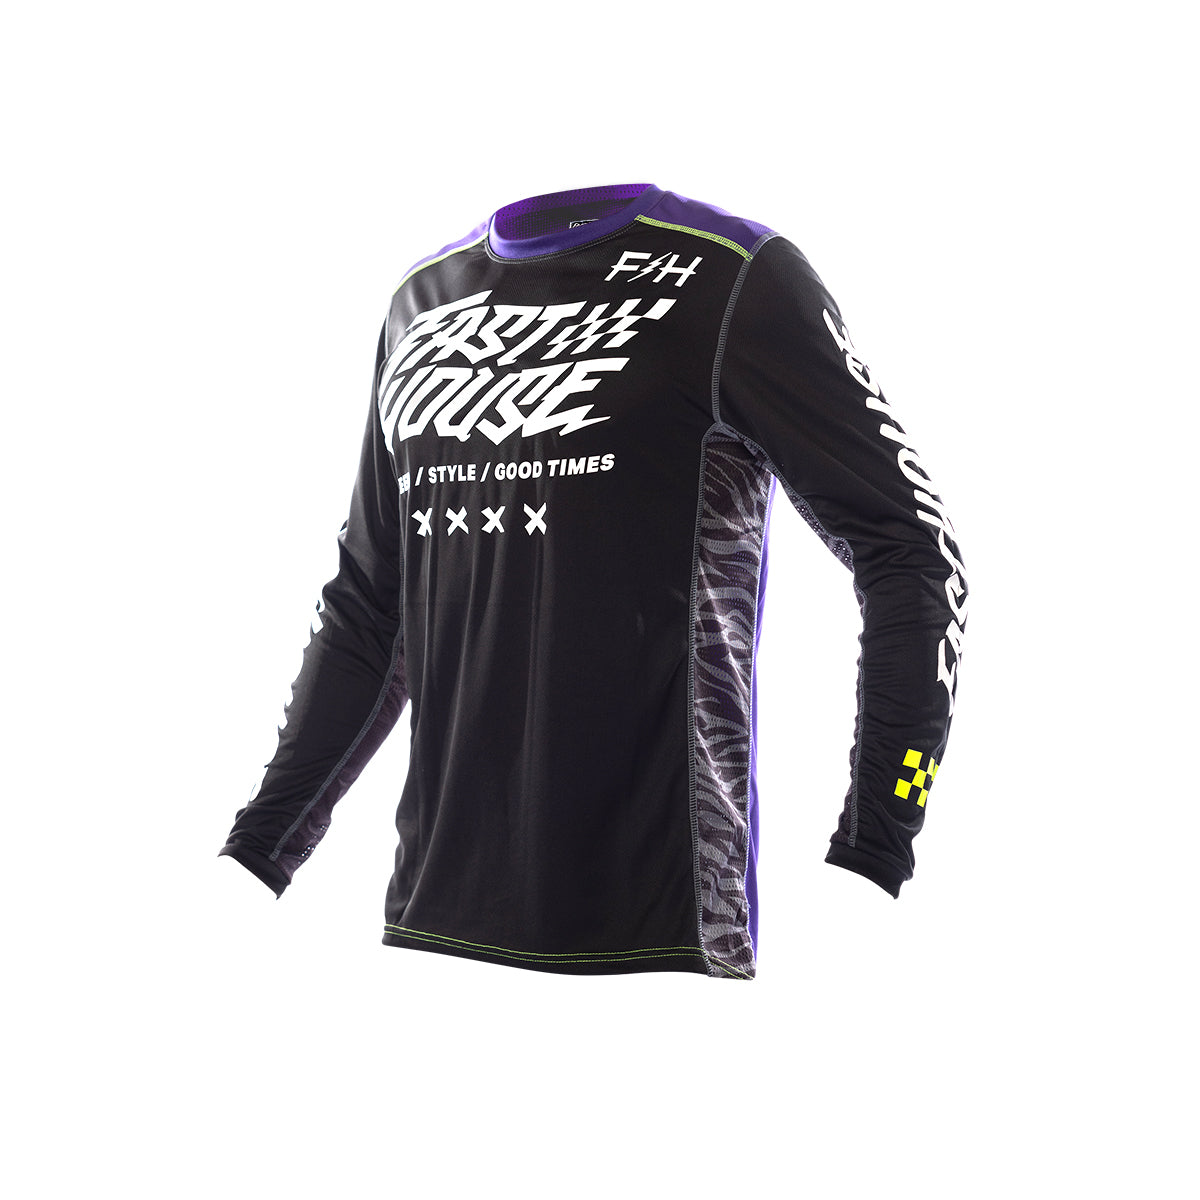 Grindhouse Rufio Youth Jersey - Black/Purple